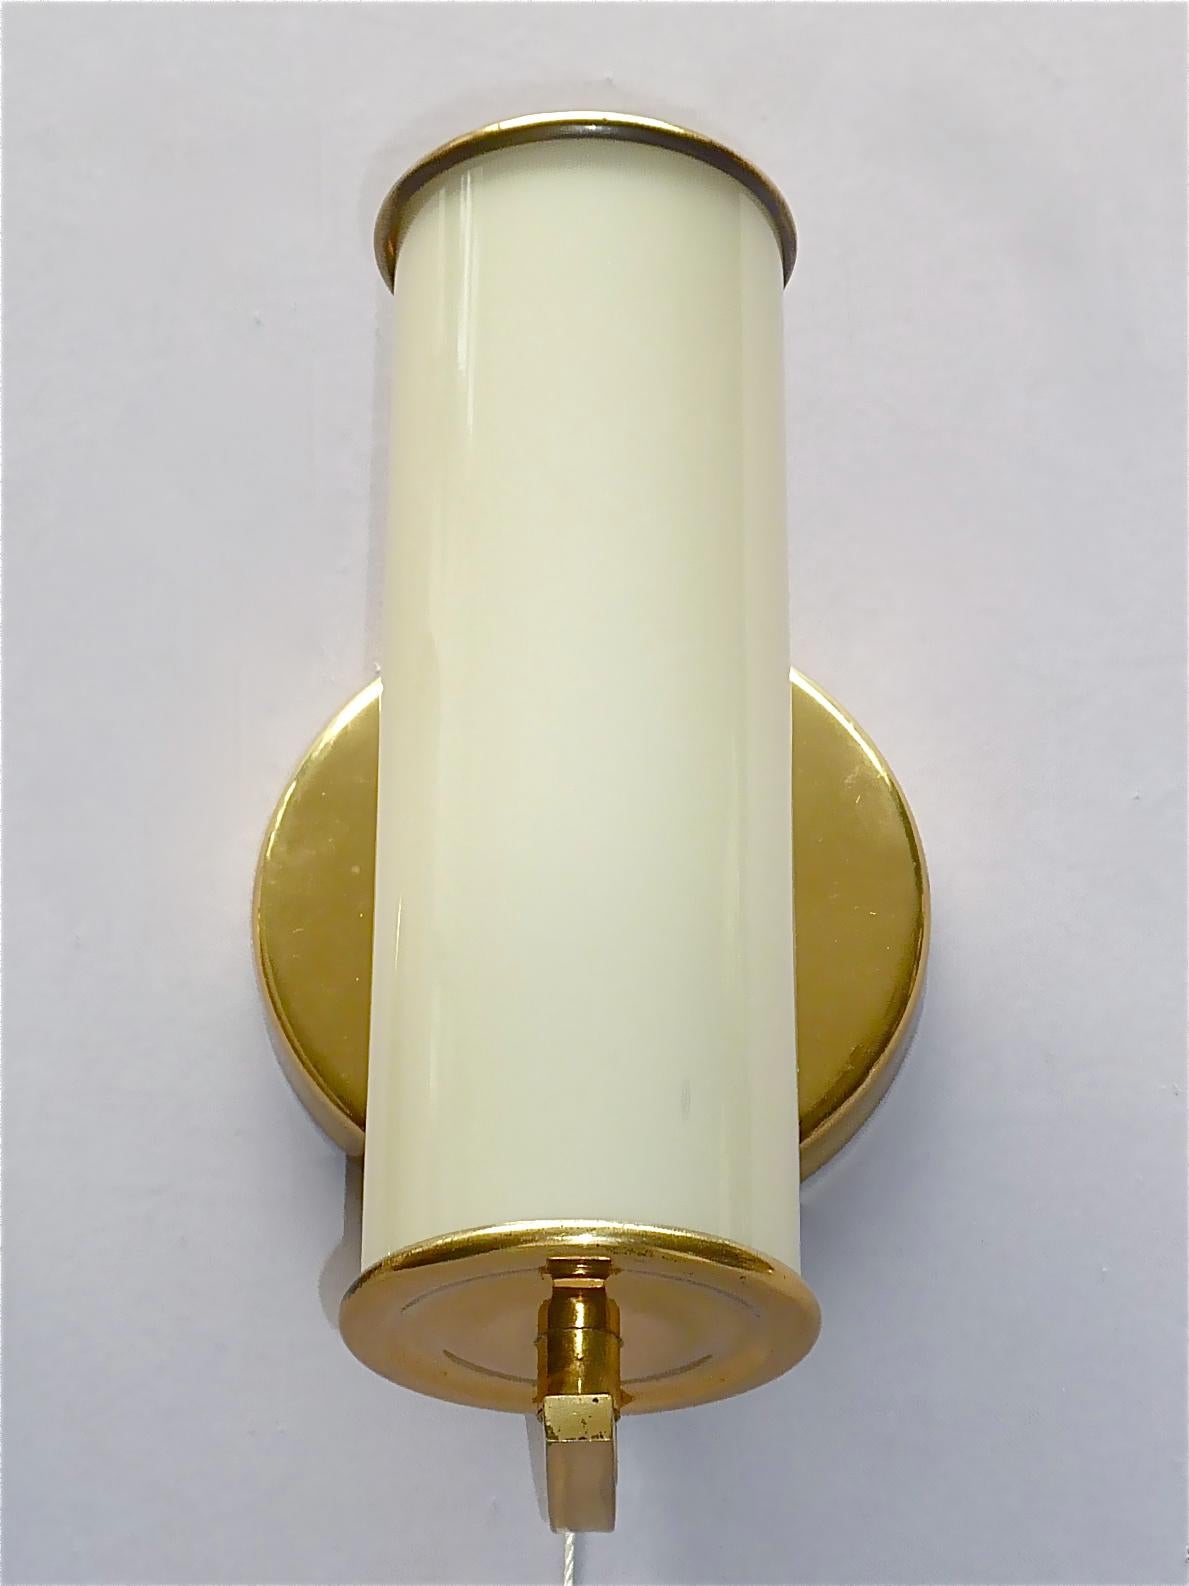 Pair Modernist Bauhaus Sconces Tynell Style Brass Yellow Tube Glass Shades 1930s 6